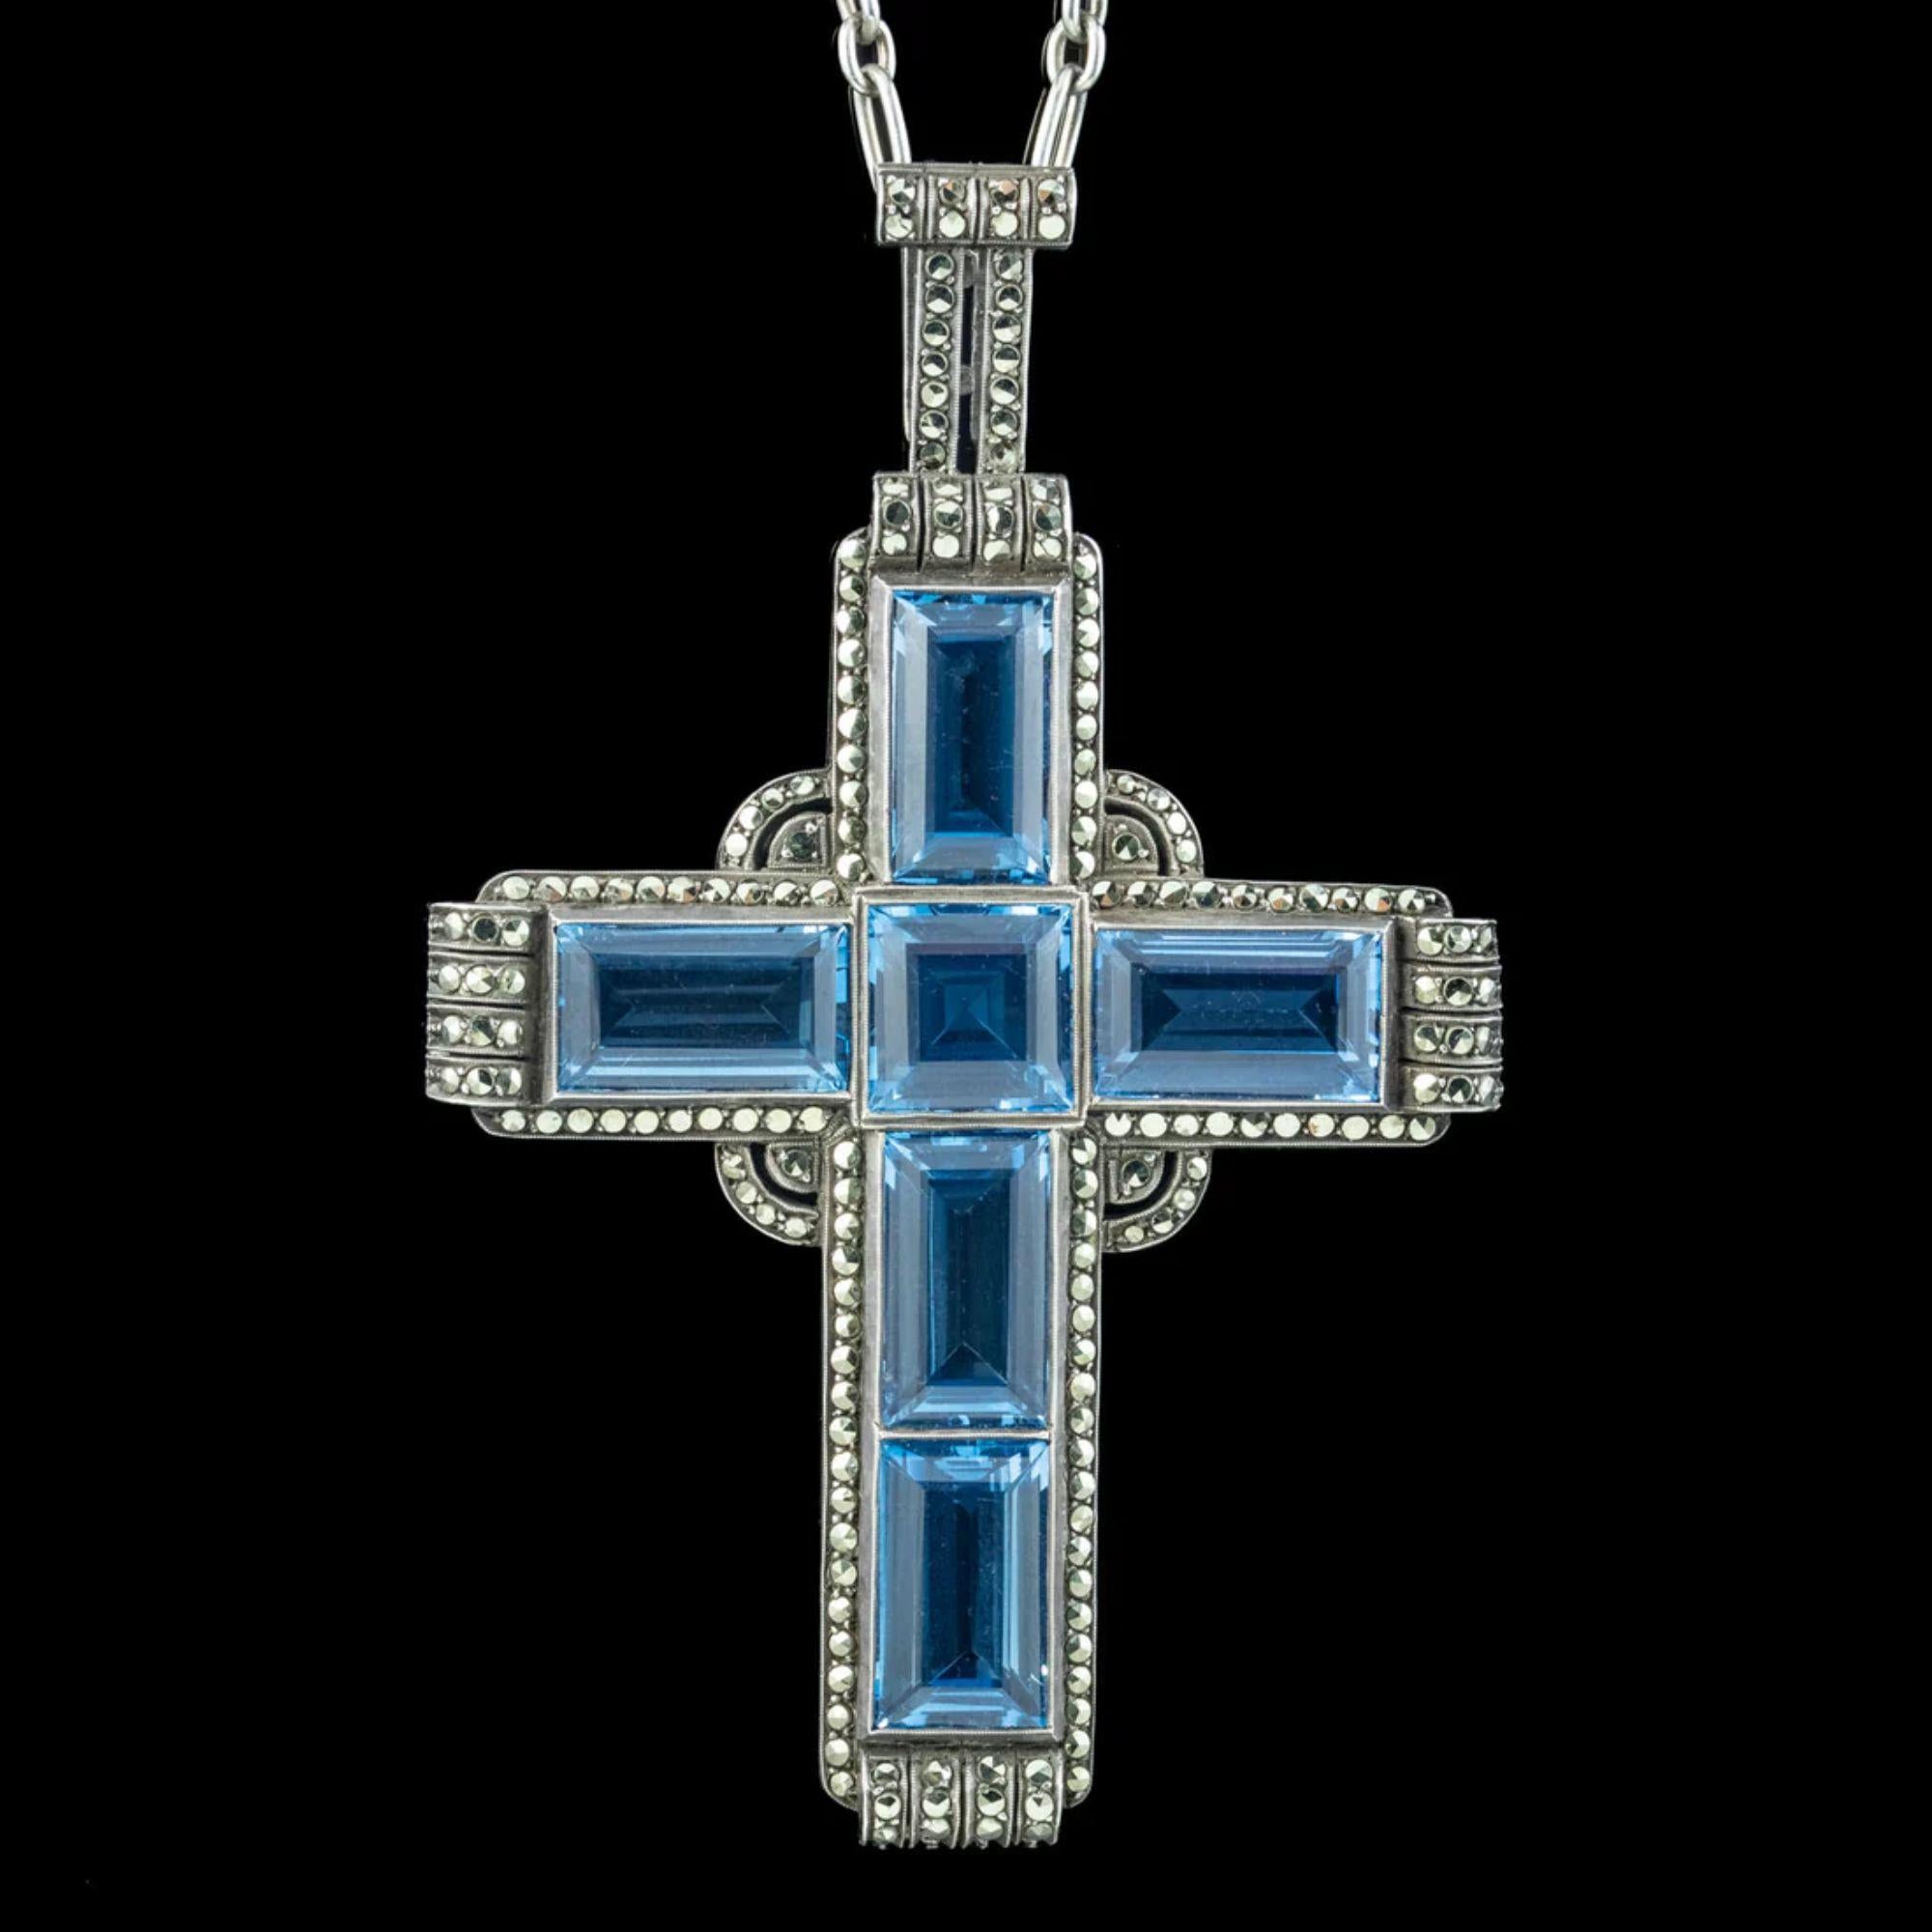 A spectacular Art Deco cross pendant made by renowned German jeweller Theodor Fahrner in the early 1900s. The cross is set with six magnificent step cut synthetic blue spinel, totalling approx. 47 carats and is modelled in solid sterling silver with